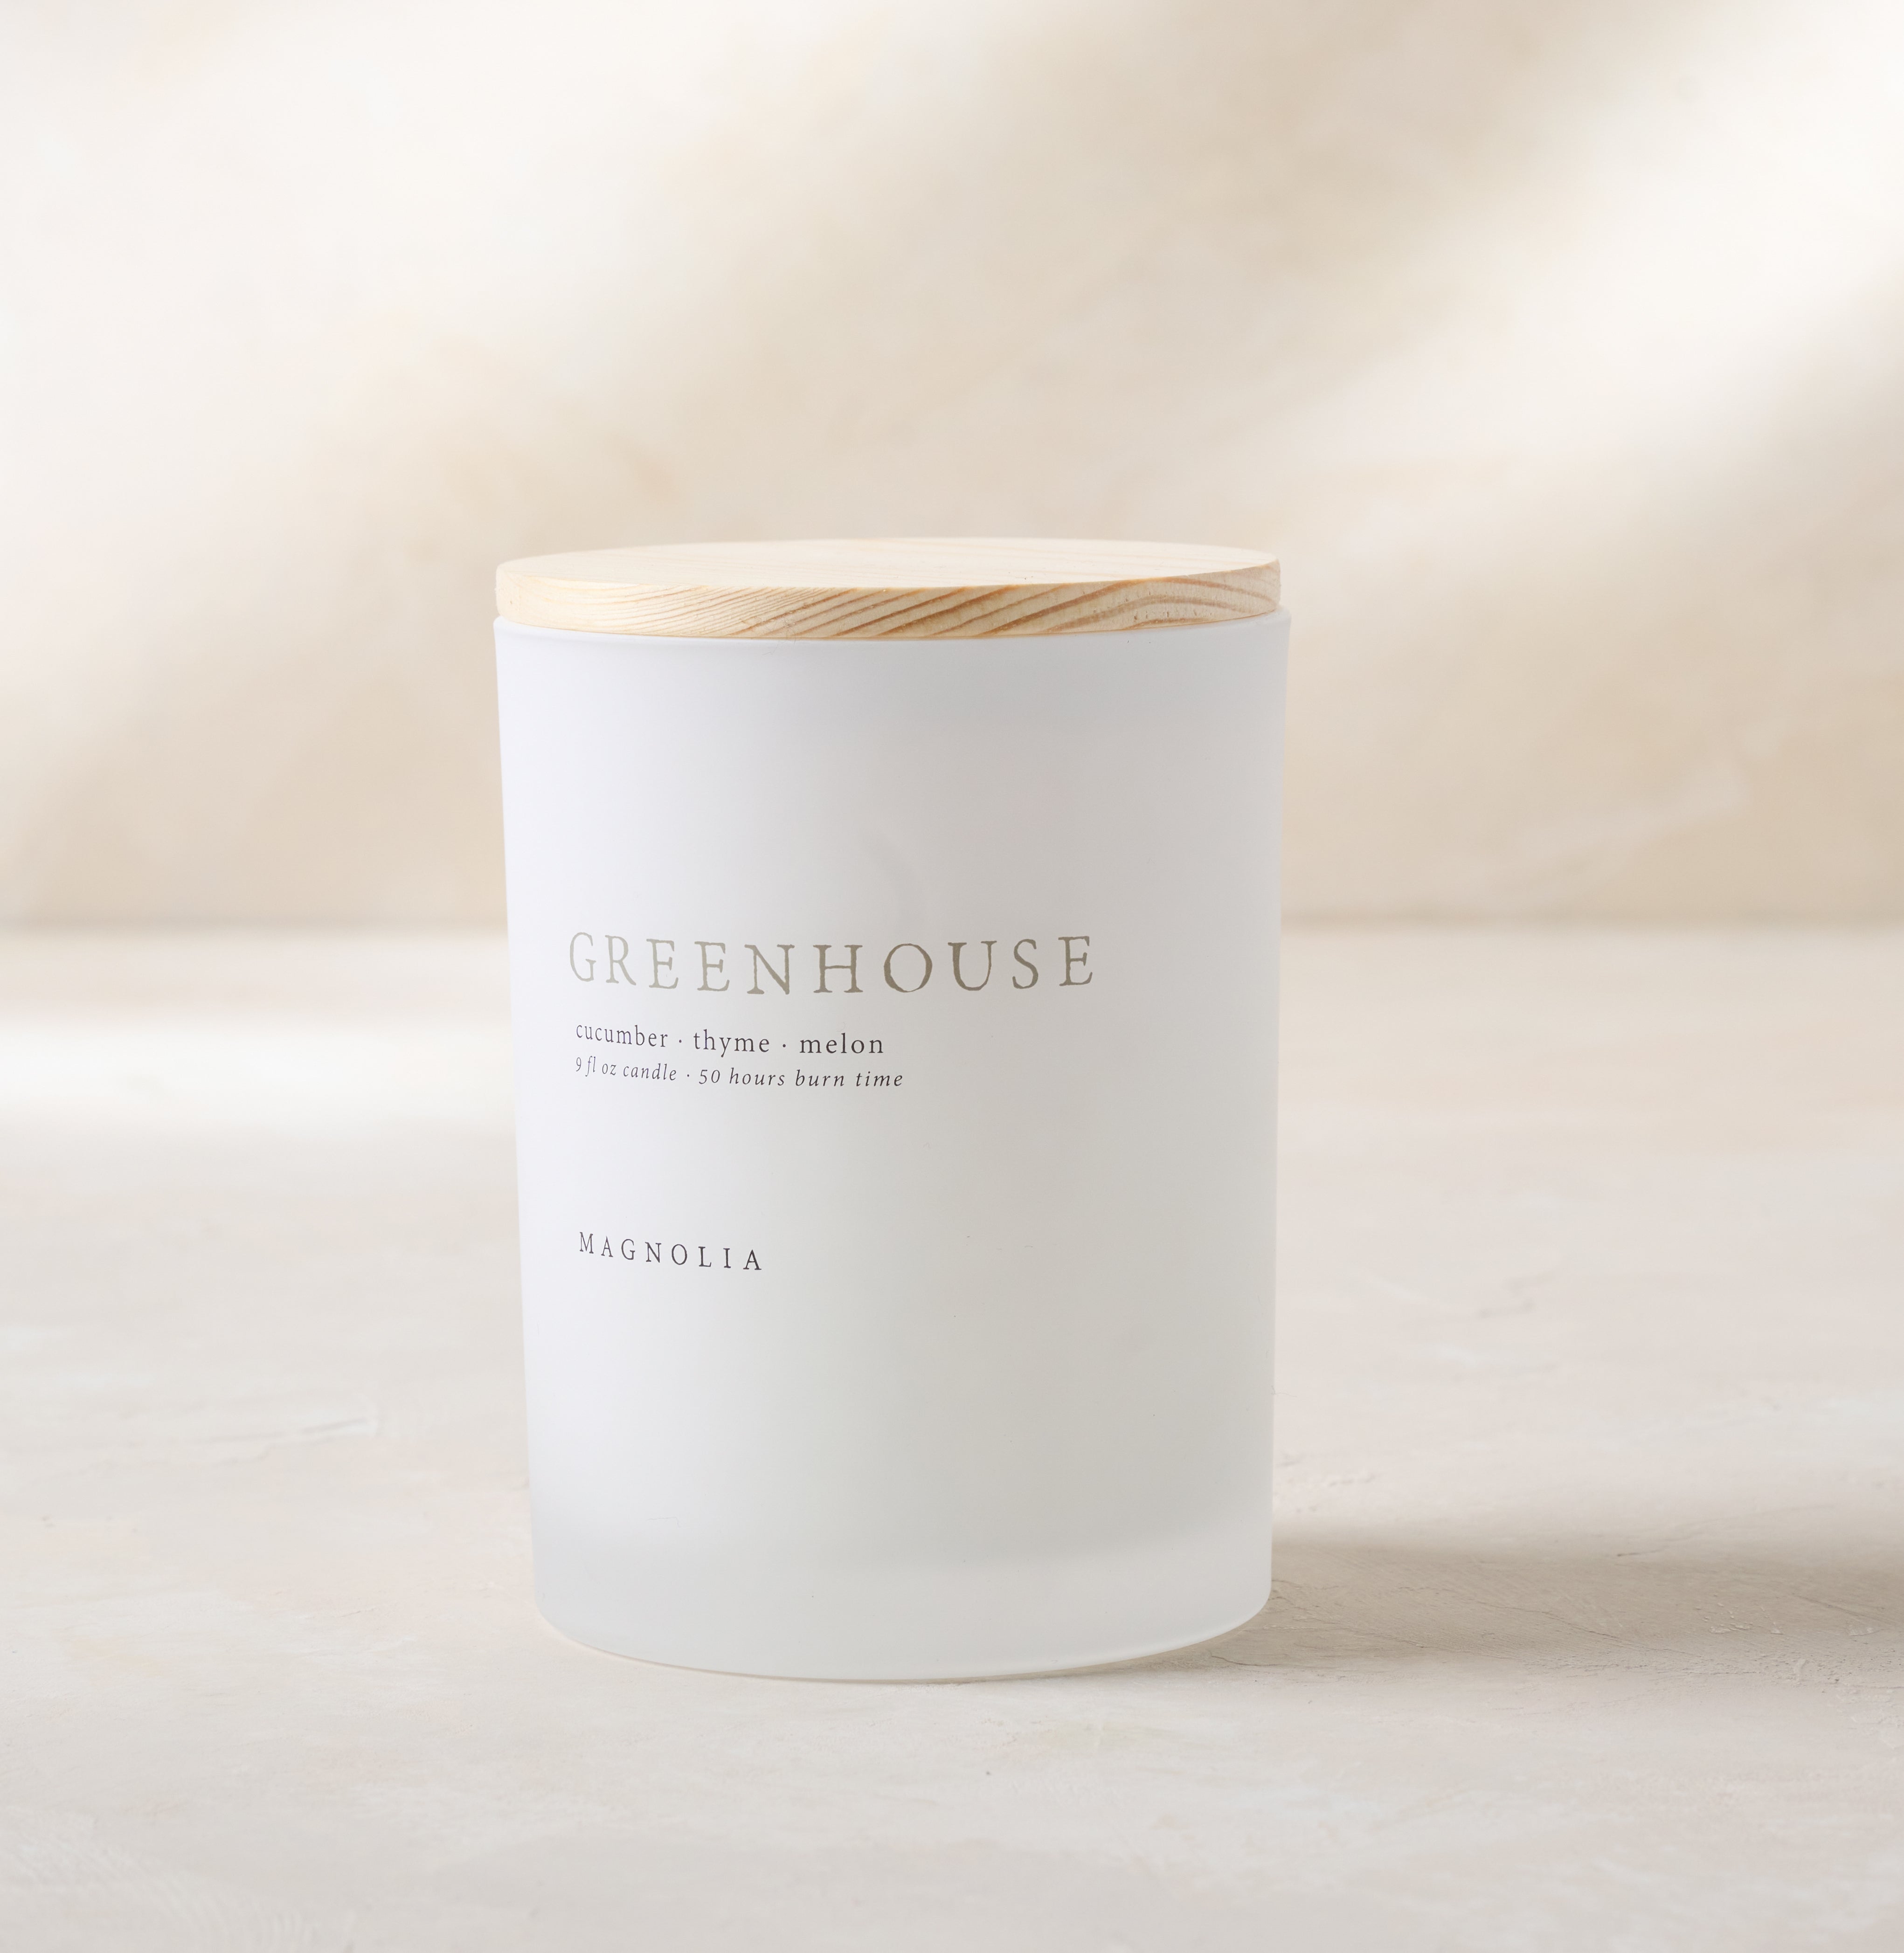 magnolia greenhouse candle with wood lid notes scents of cucumber thyme and melon